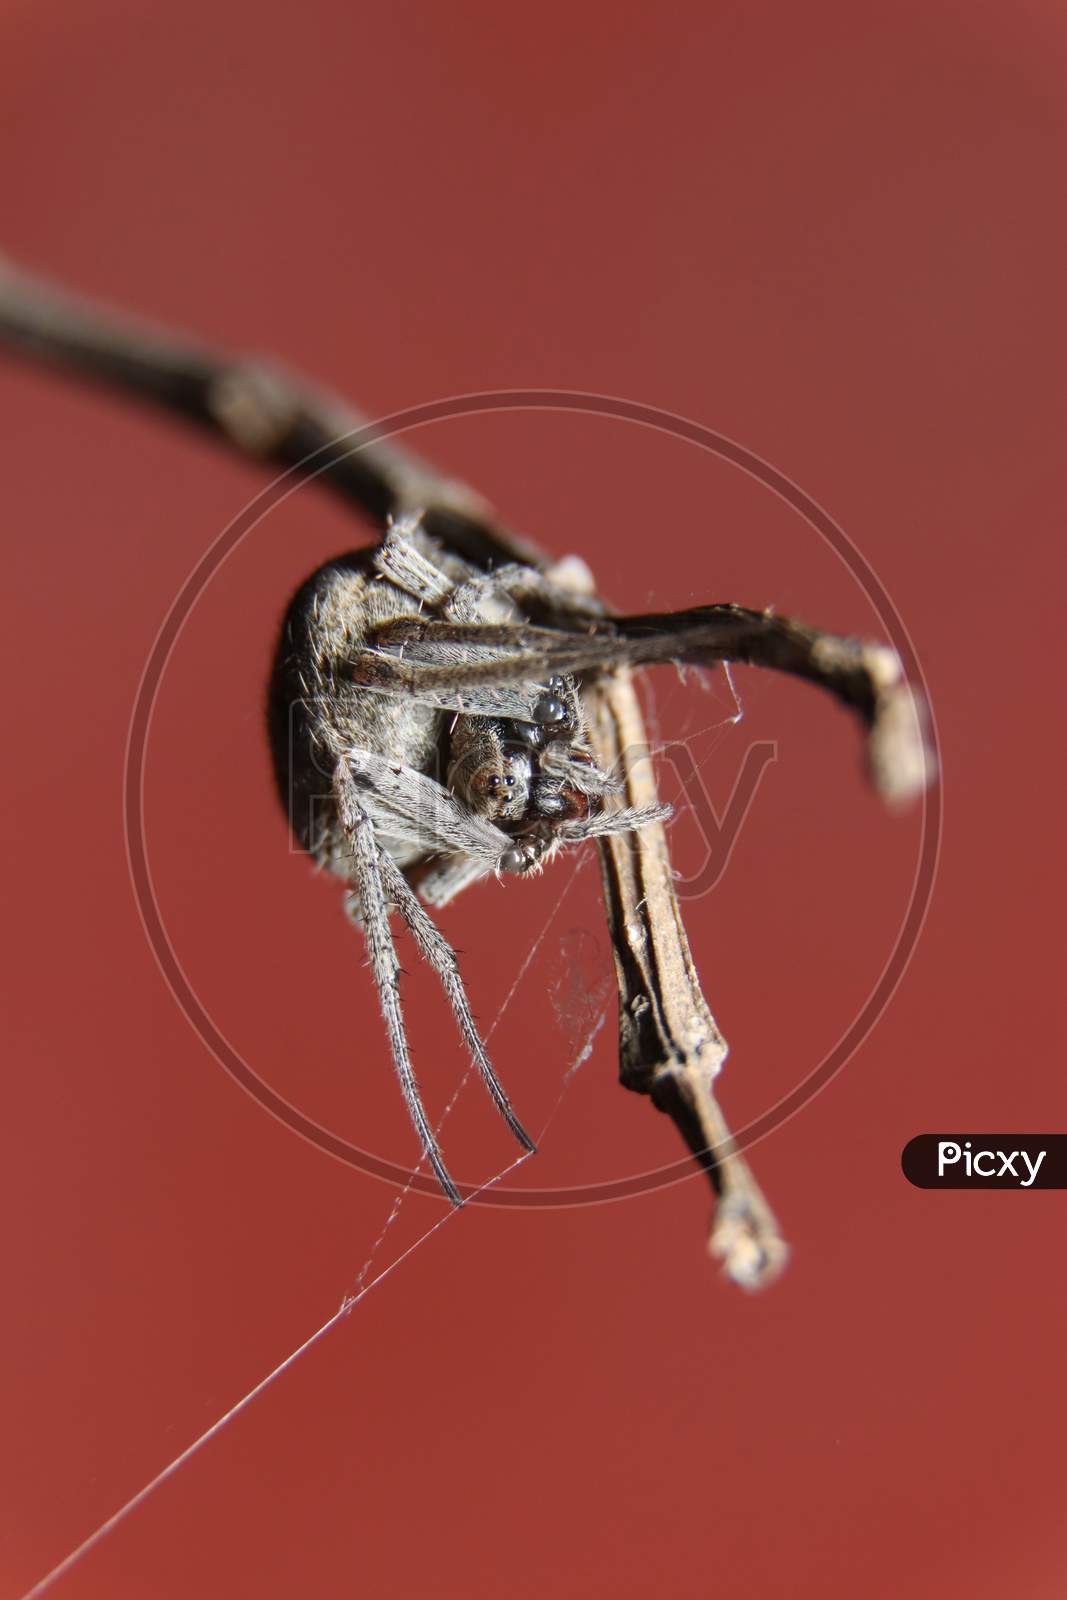 spotted ord Weaver spider closeup